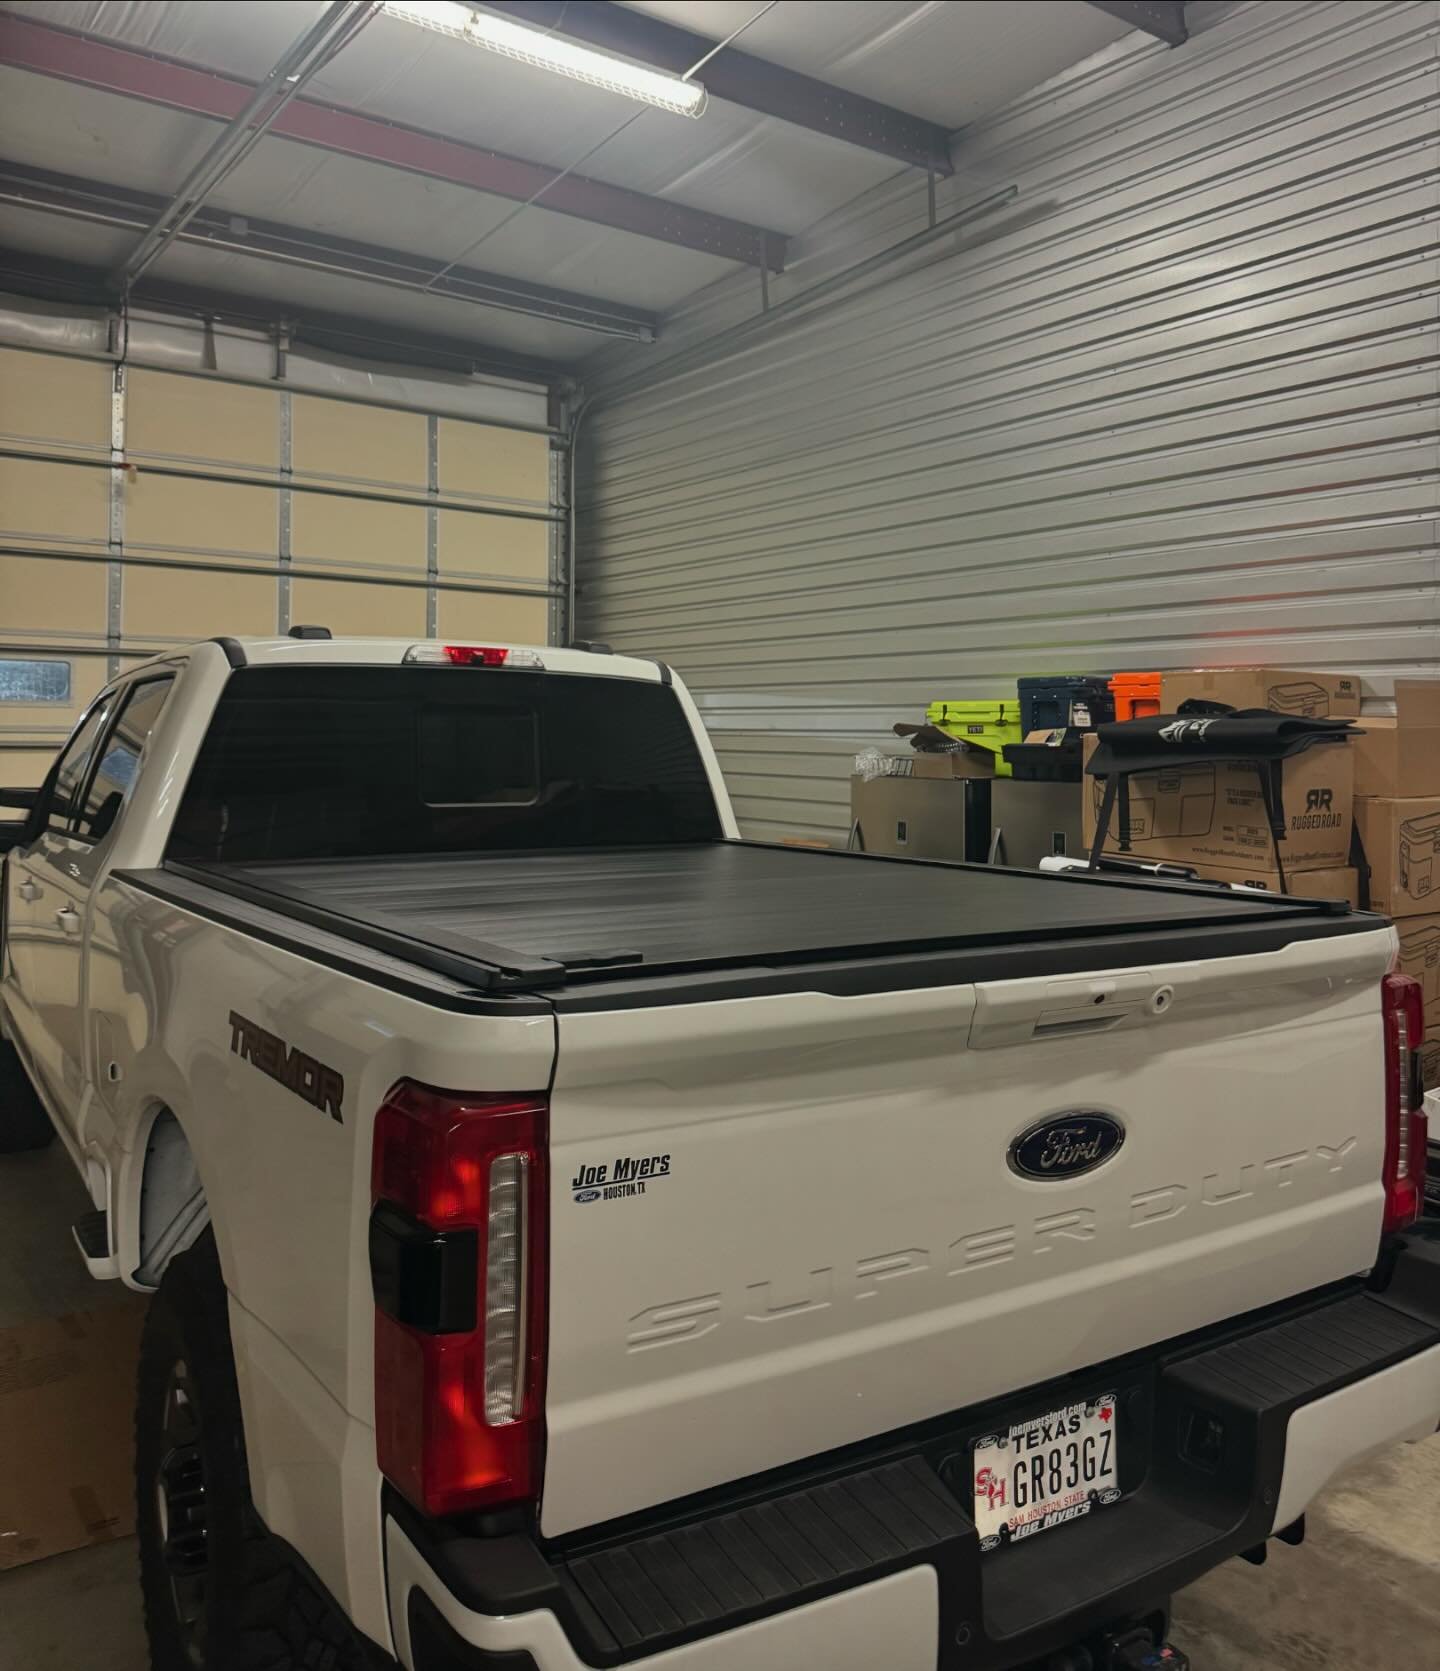 With all this rain today, your truck needs a bed cover! The tremor went with a RetraxONE XR bed cover!  Call or email us today for all your truck needs!